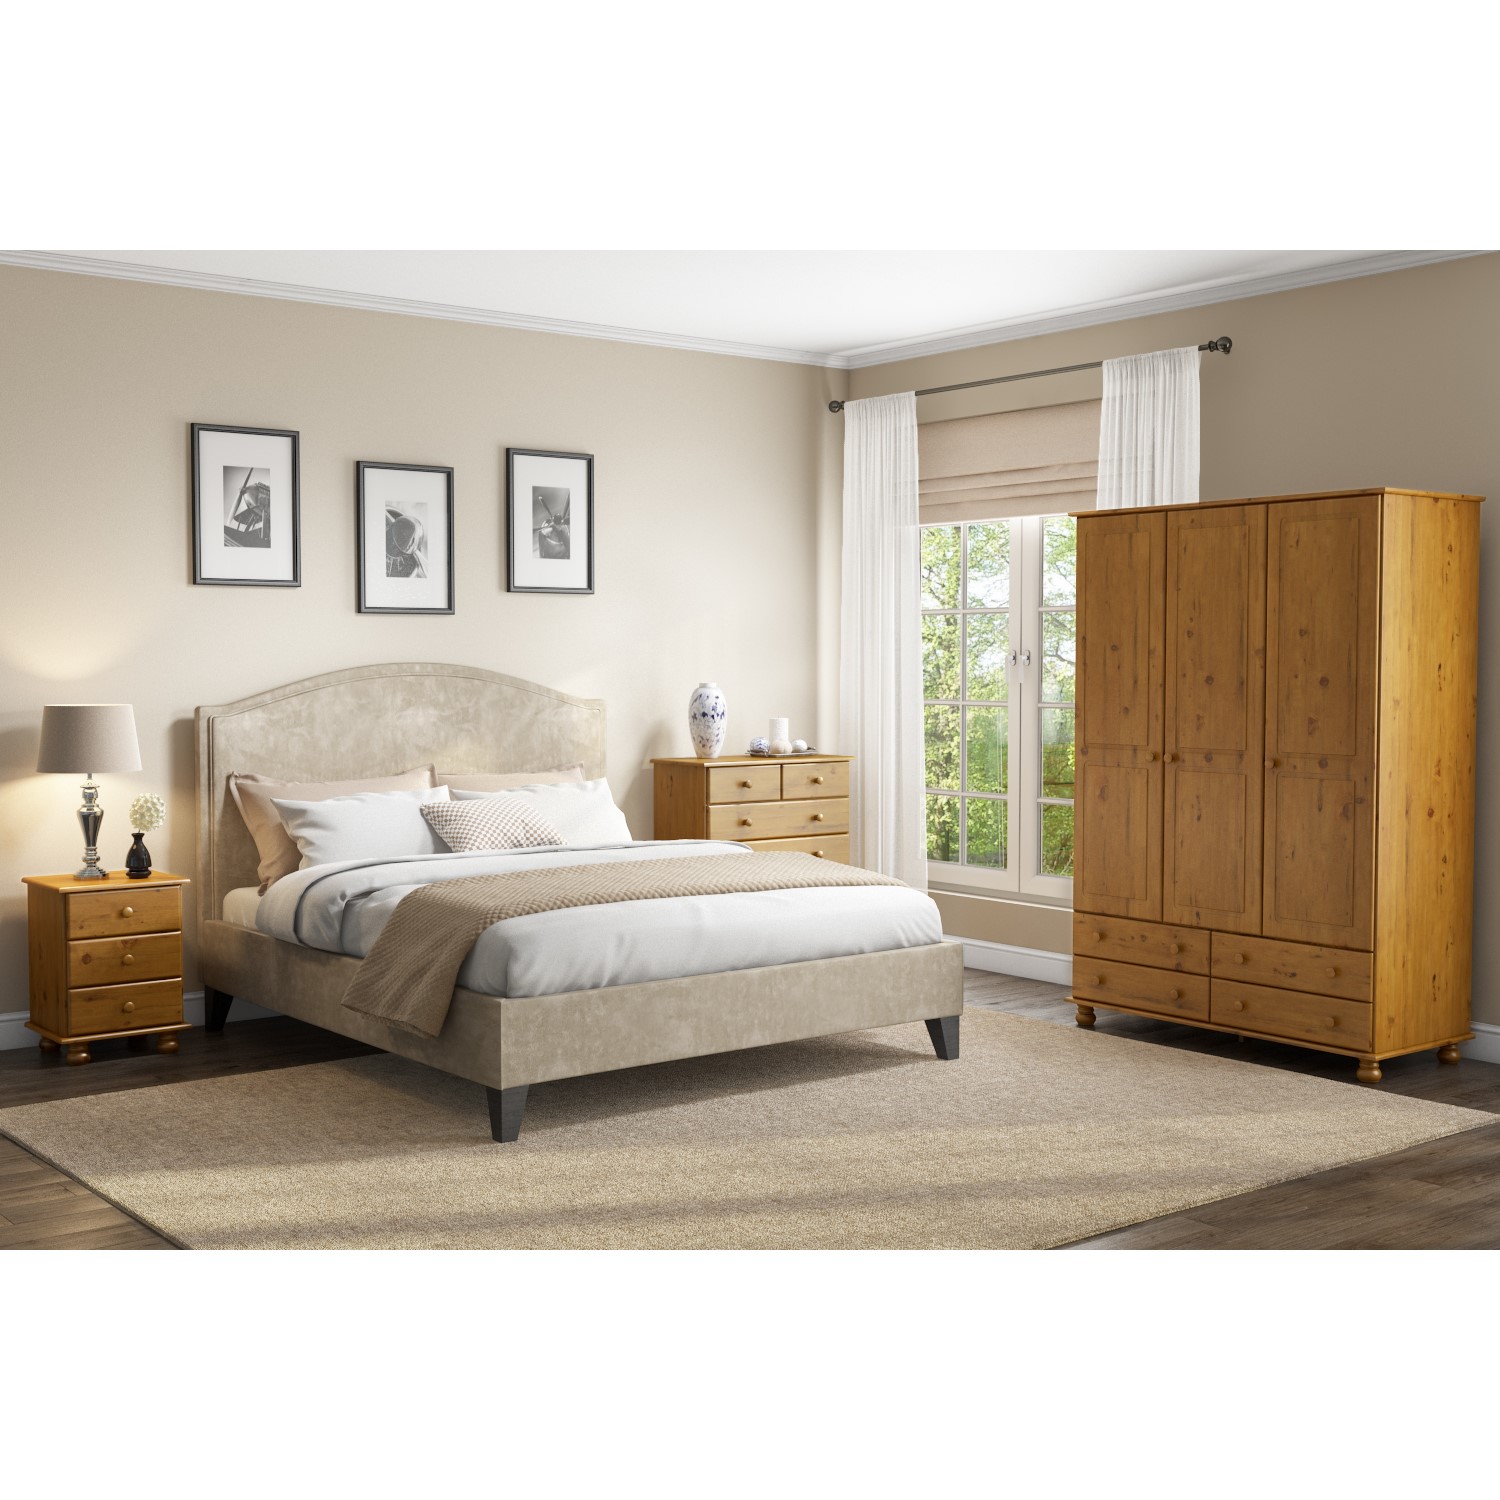 Hamilton 2 3 4 Wide Chest Of Drawers In Pine Furniture123